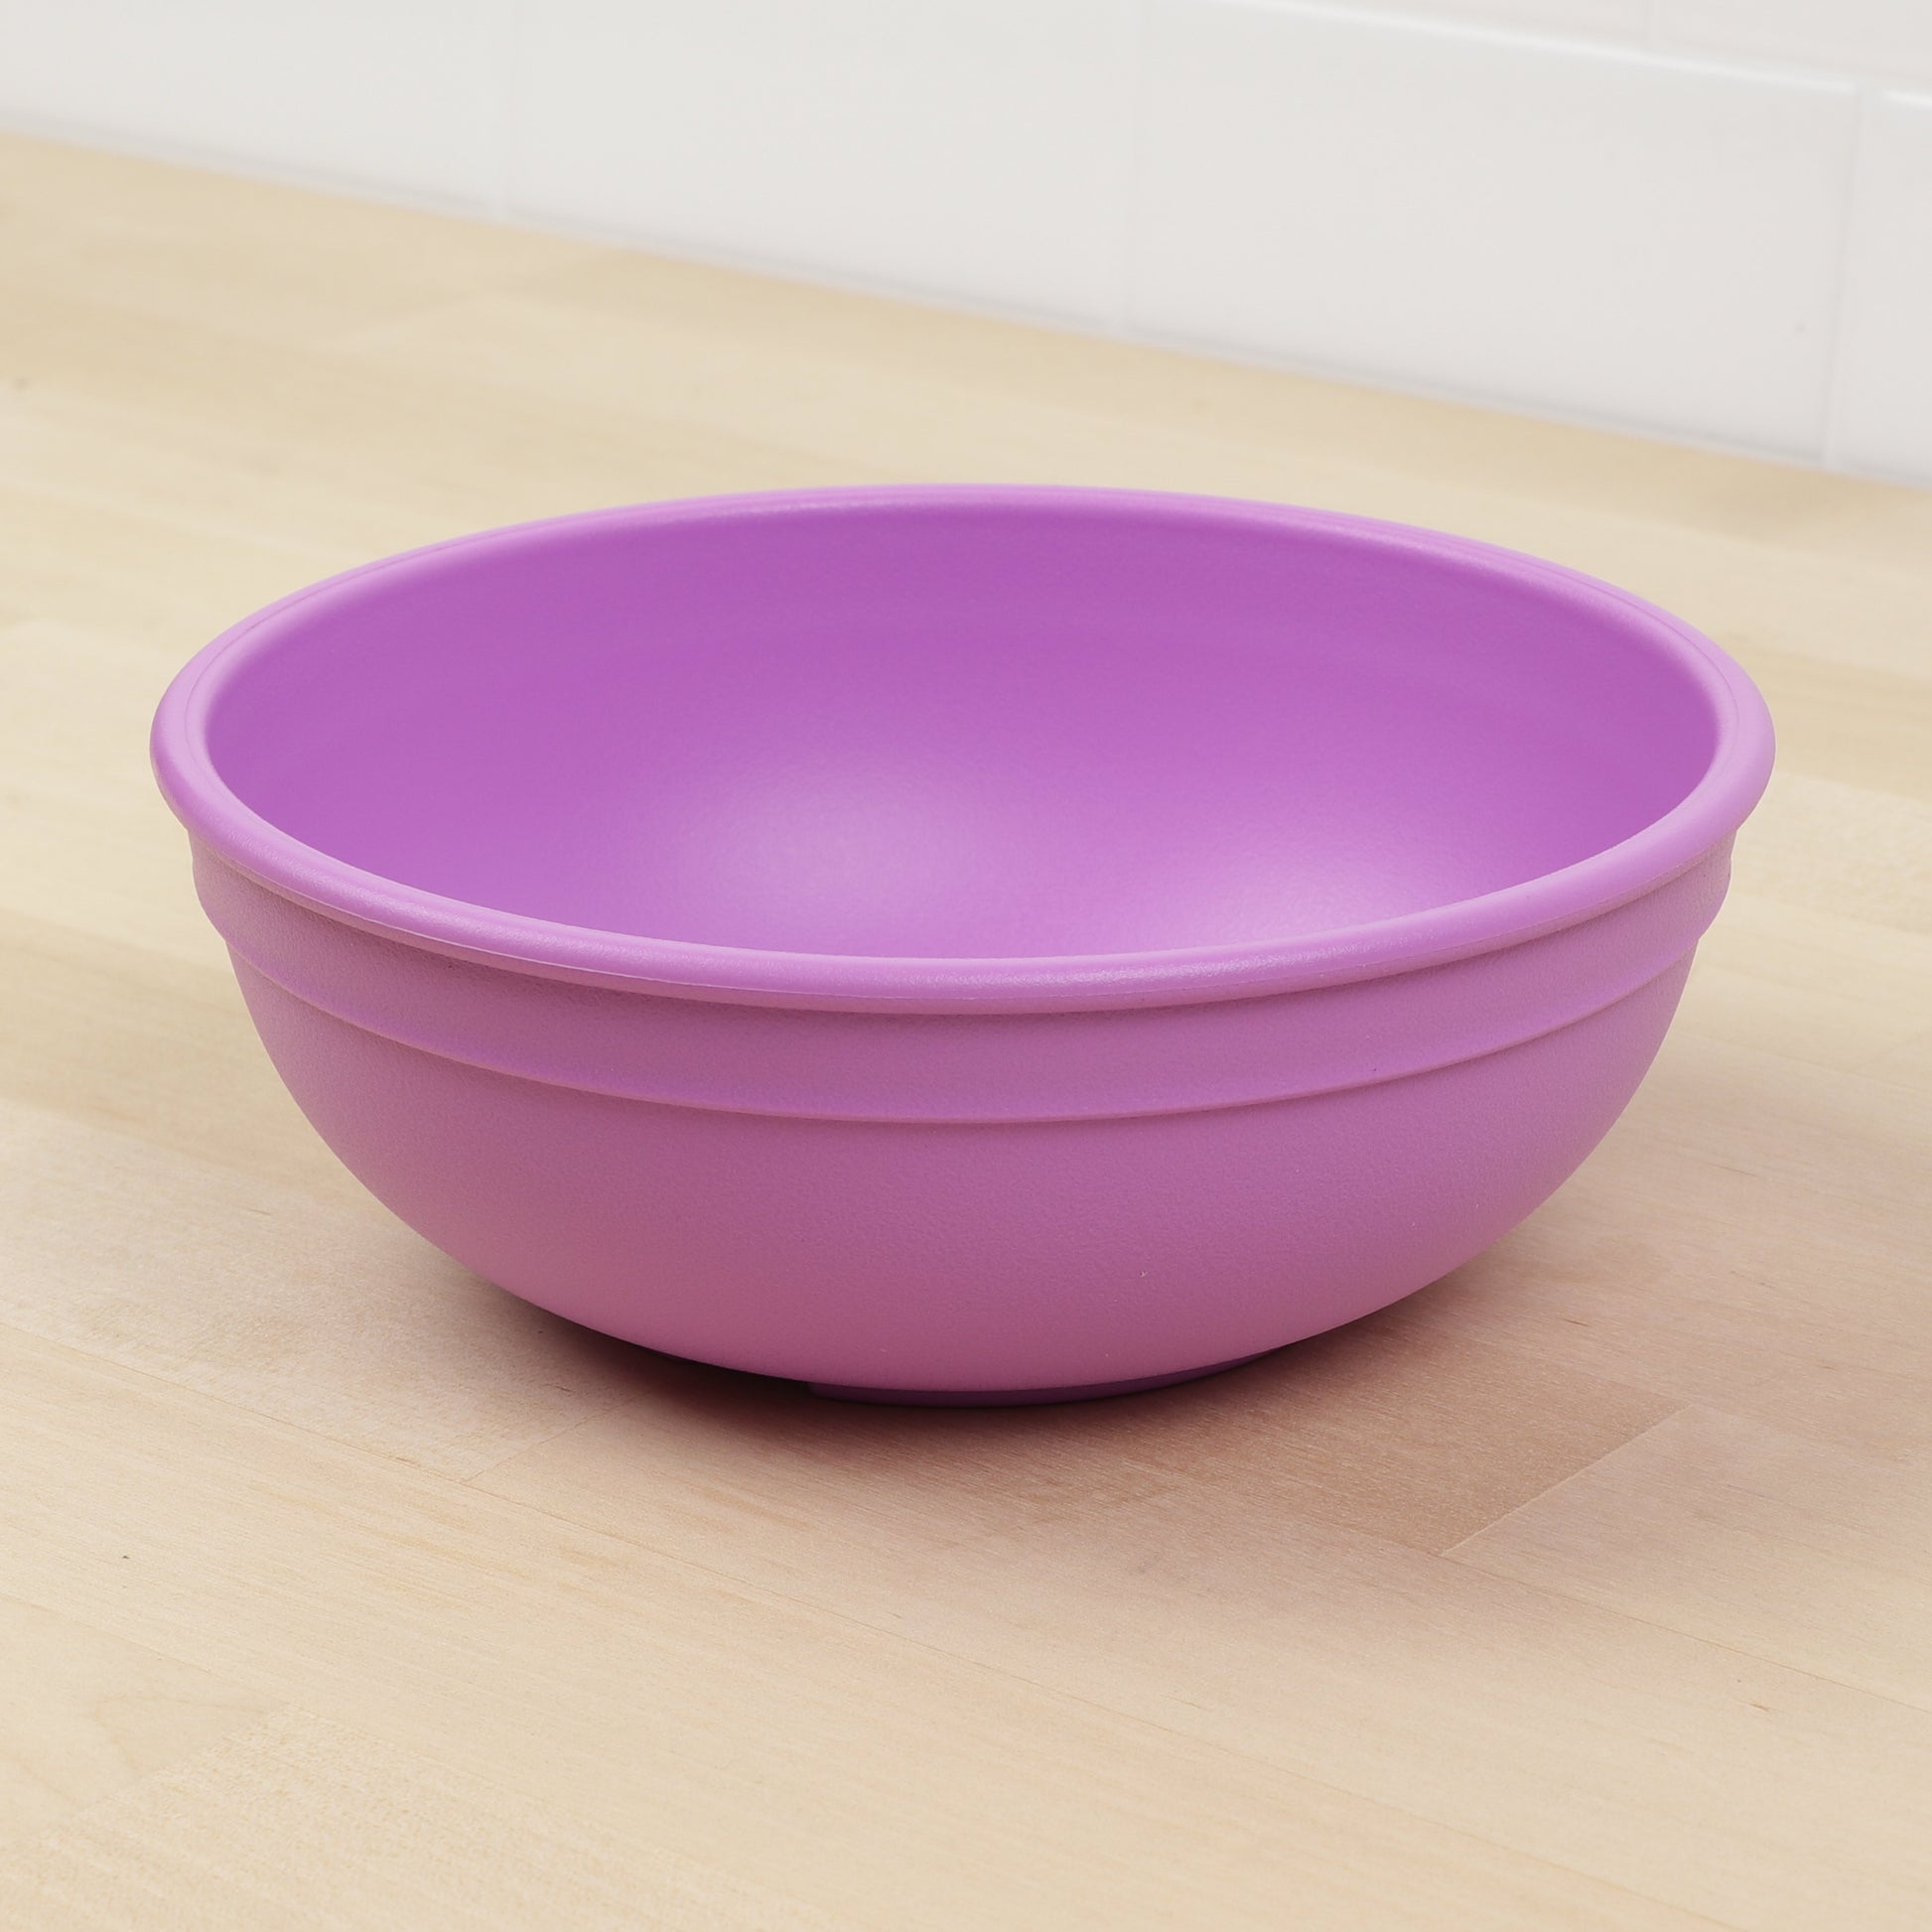 Re-Play Bowl | Purple Large Size from Bear & Moo